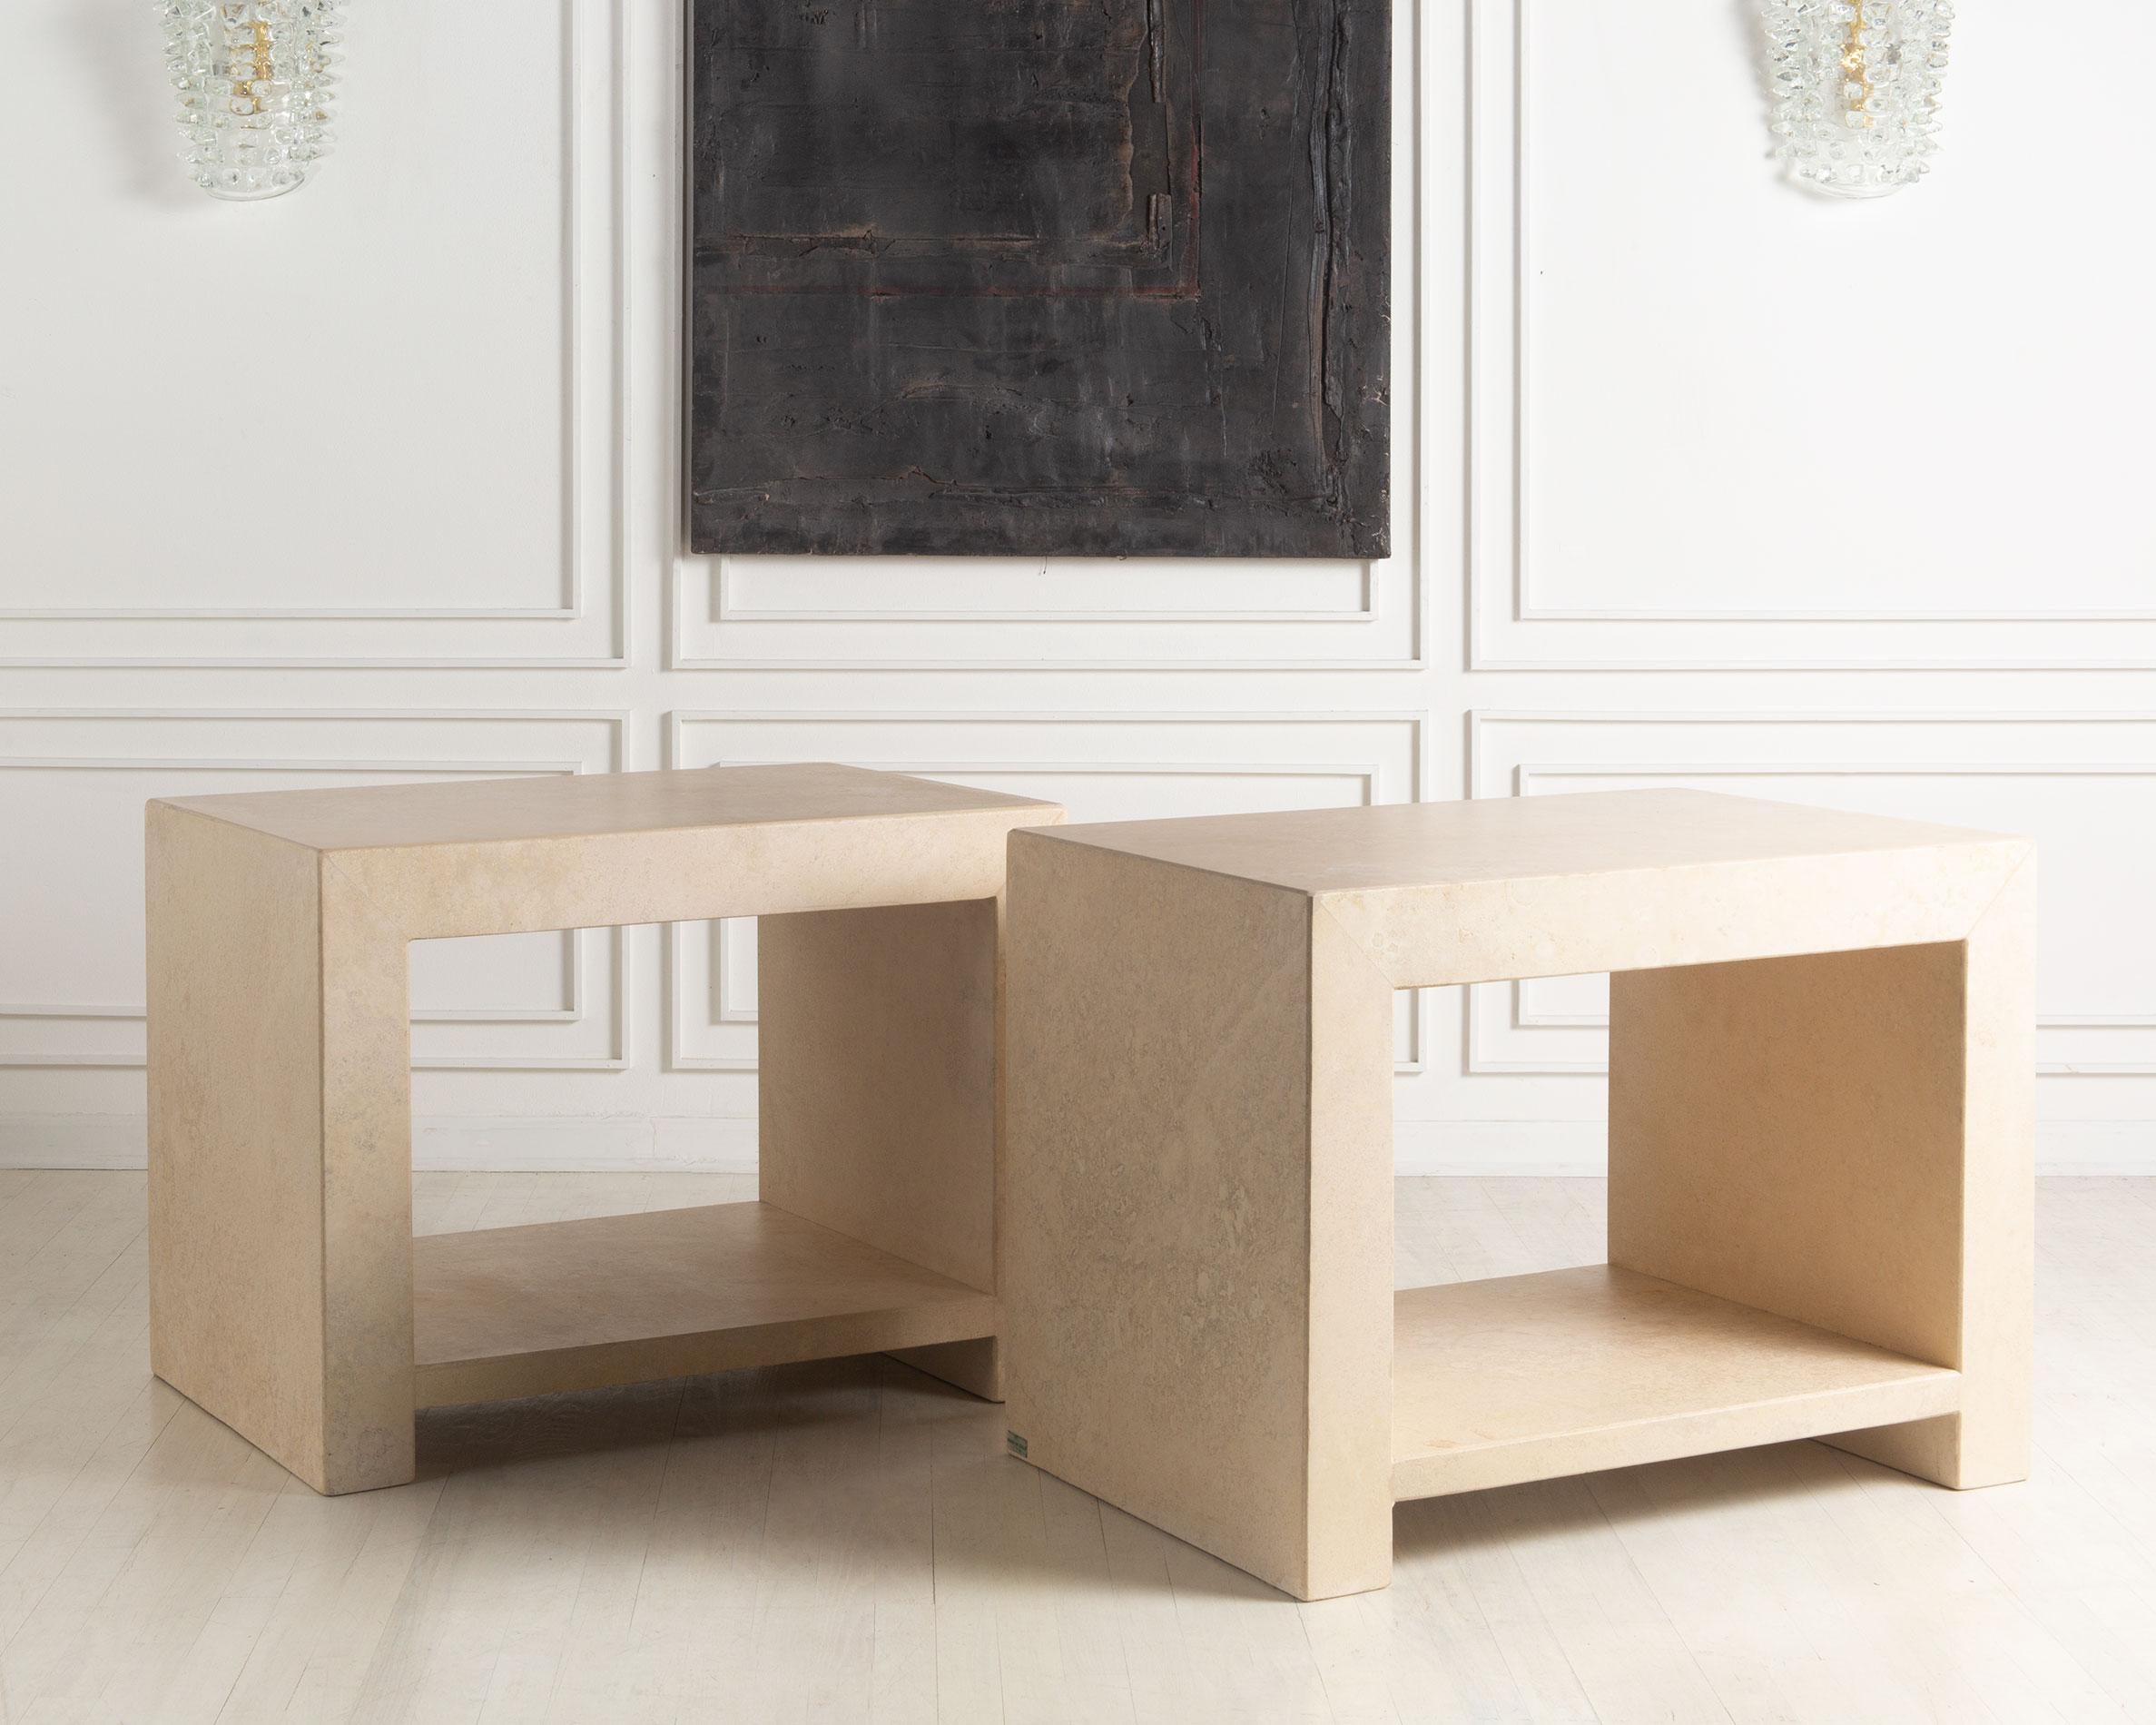 A large scale set of Italian Travertine side tables produced by CIM, Italy. Beautiful, thick travertine and a single shelf for accessorizing or storage. These would be fantastic in a living room or bedroom as nightstands.